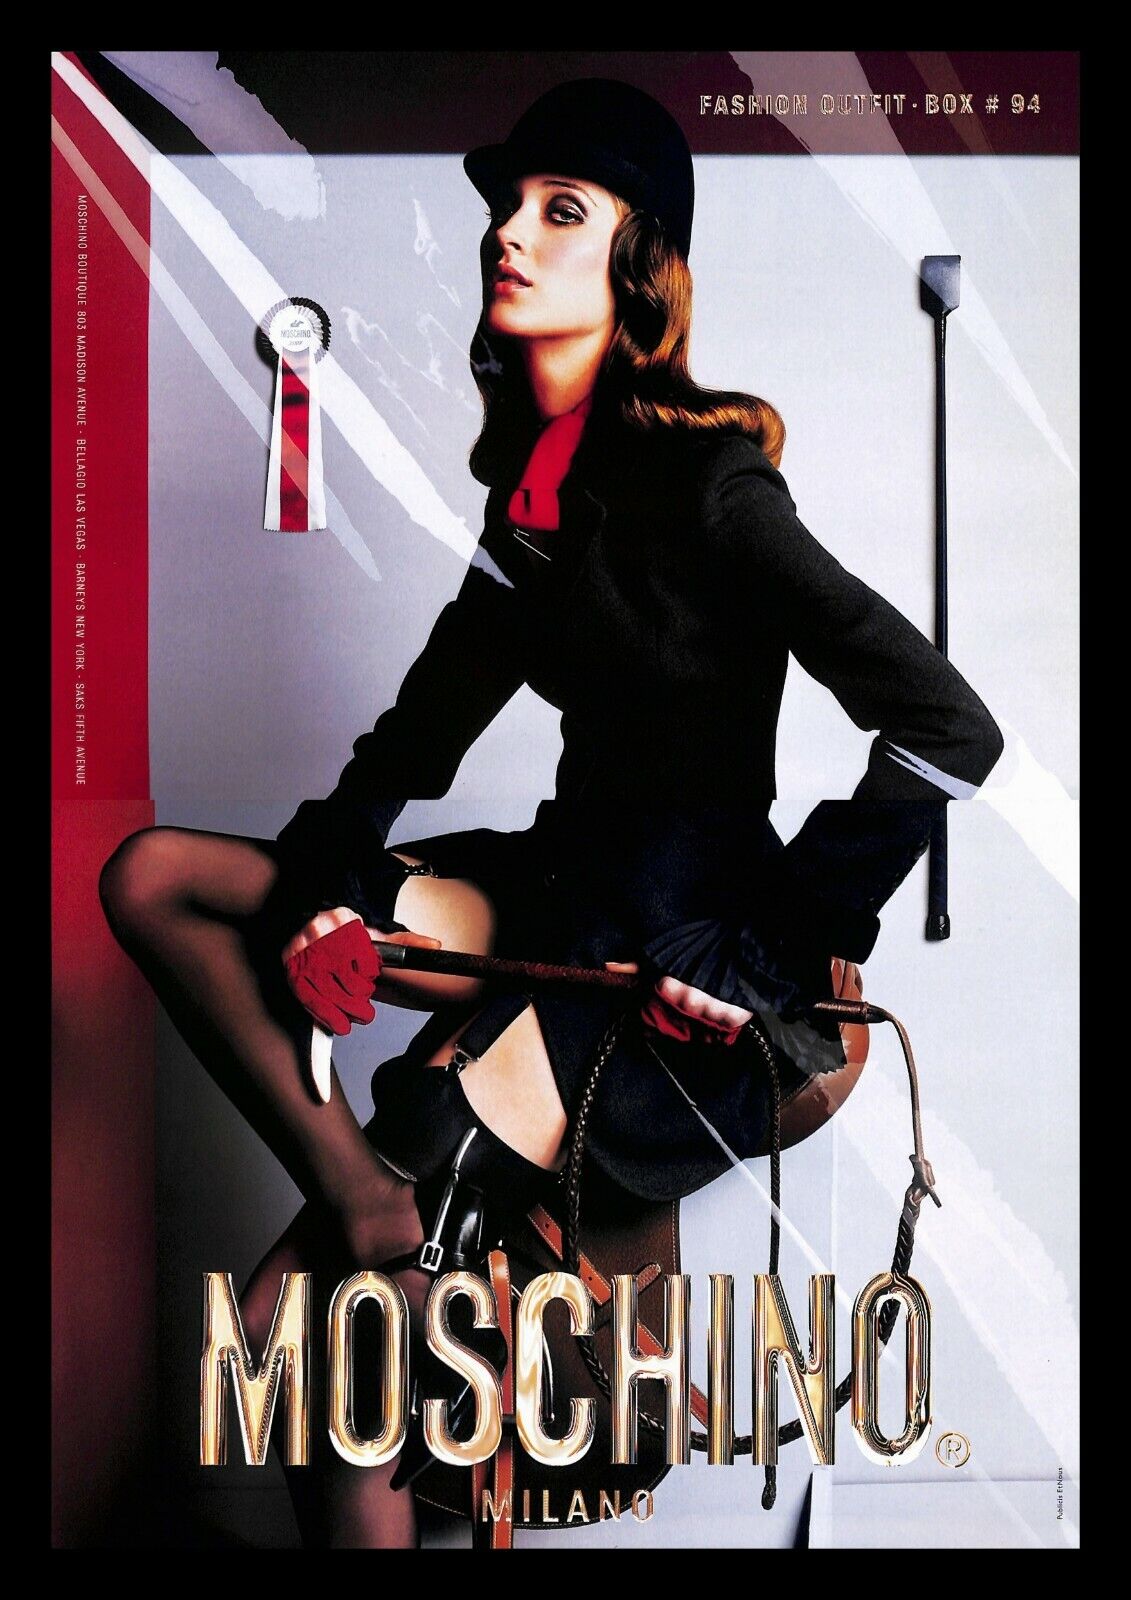 2000 Moschino Fashion Clothing Vintage PRINT AD Equestrian Outfit Model Sexy 